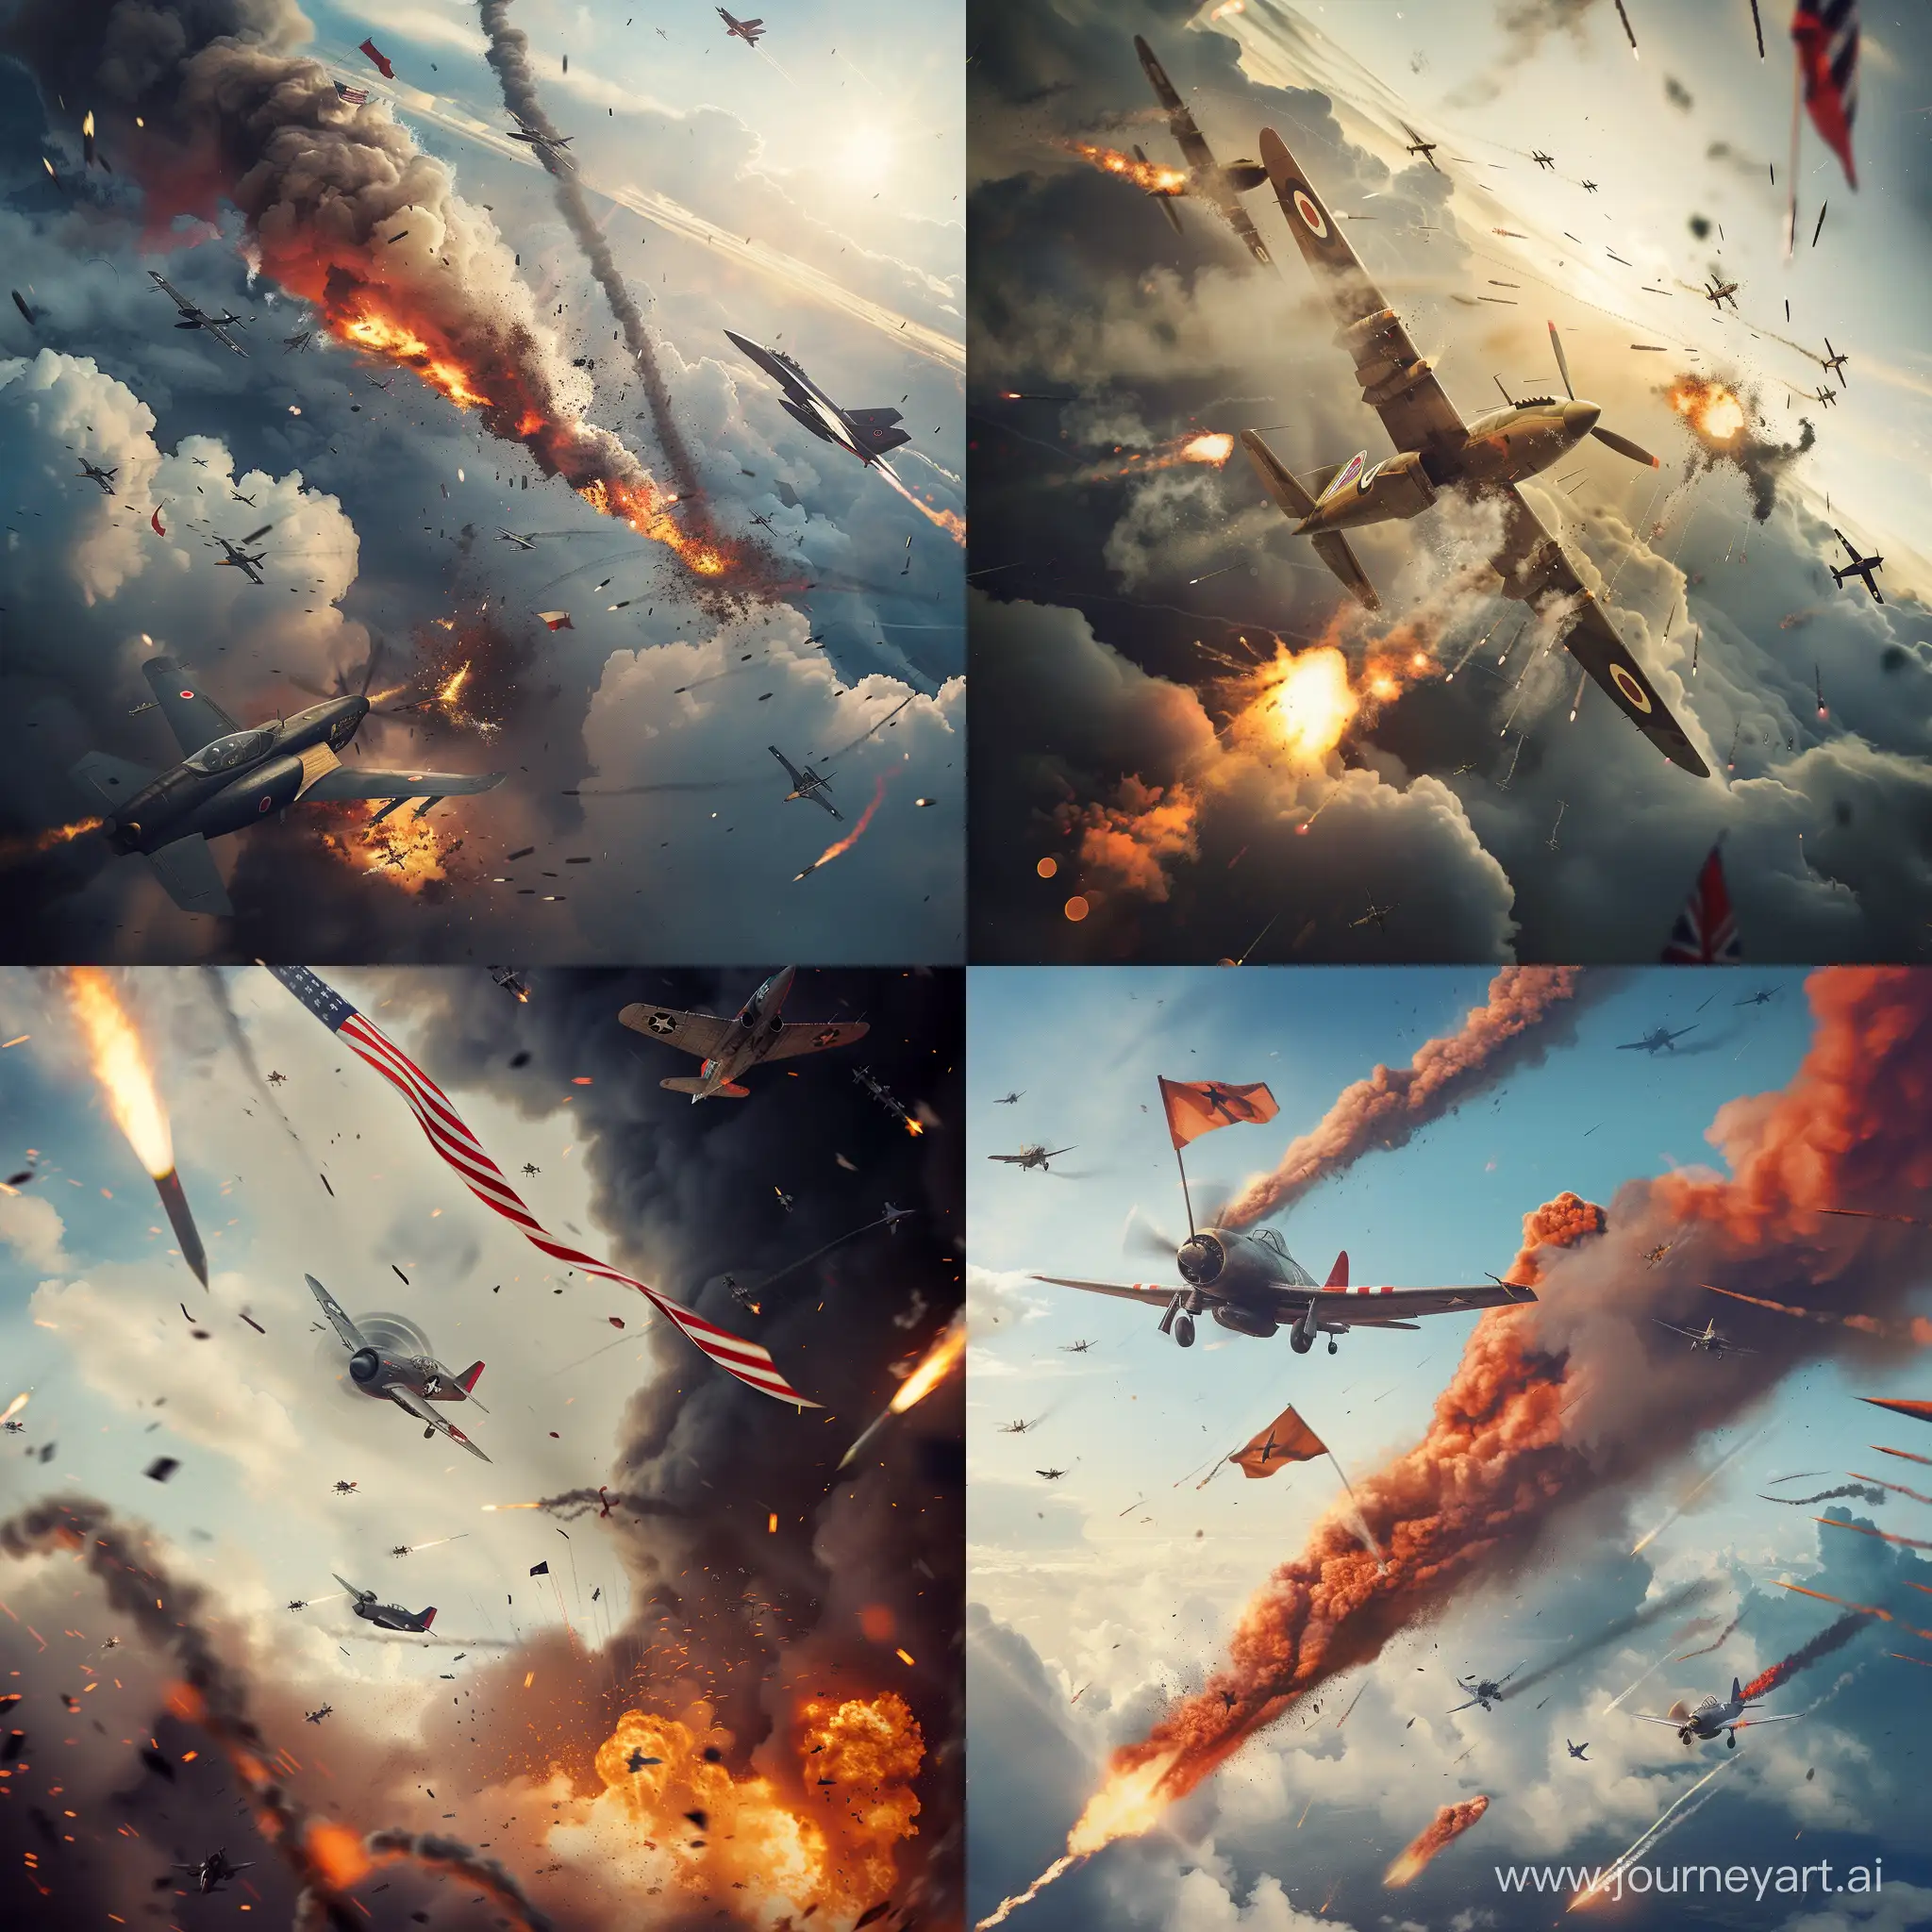 create a image of  Air force destroying  fighter planes and wins the battle and releases flag smoke with all visual effects and weapon effects